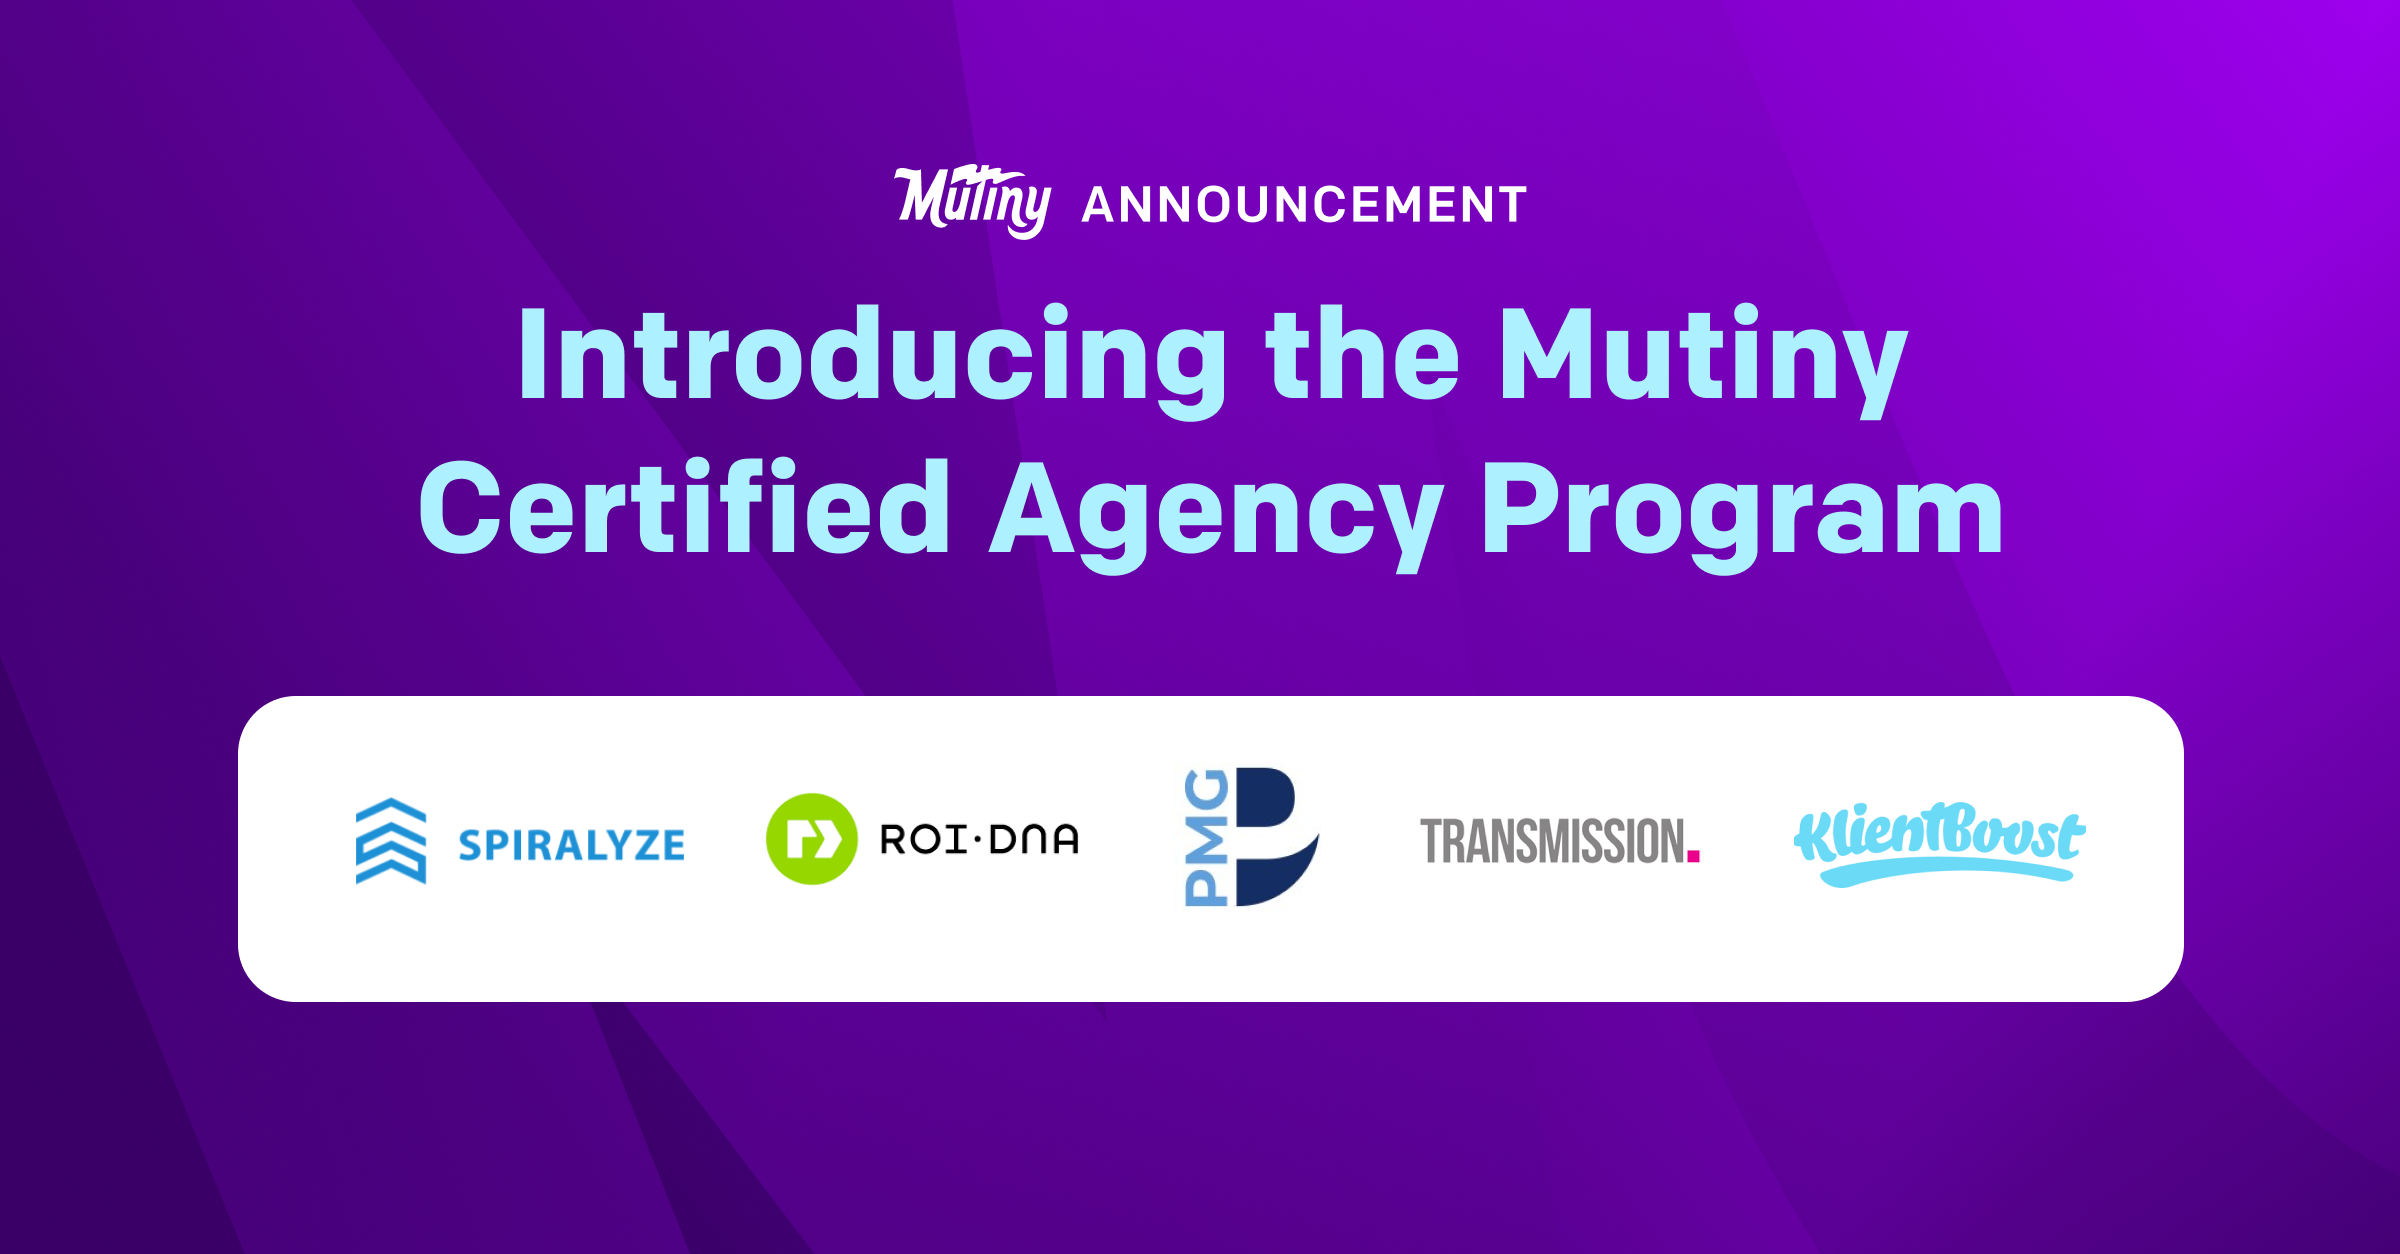 Introducing the Mutiny Certified Agency Program